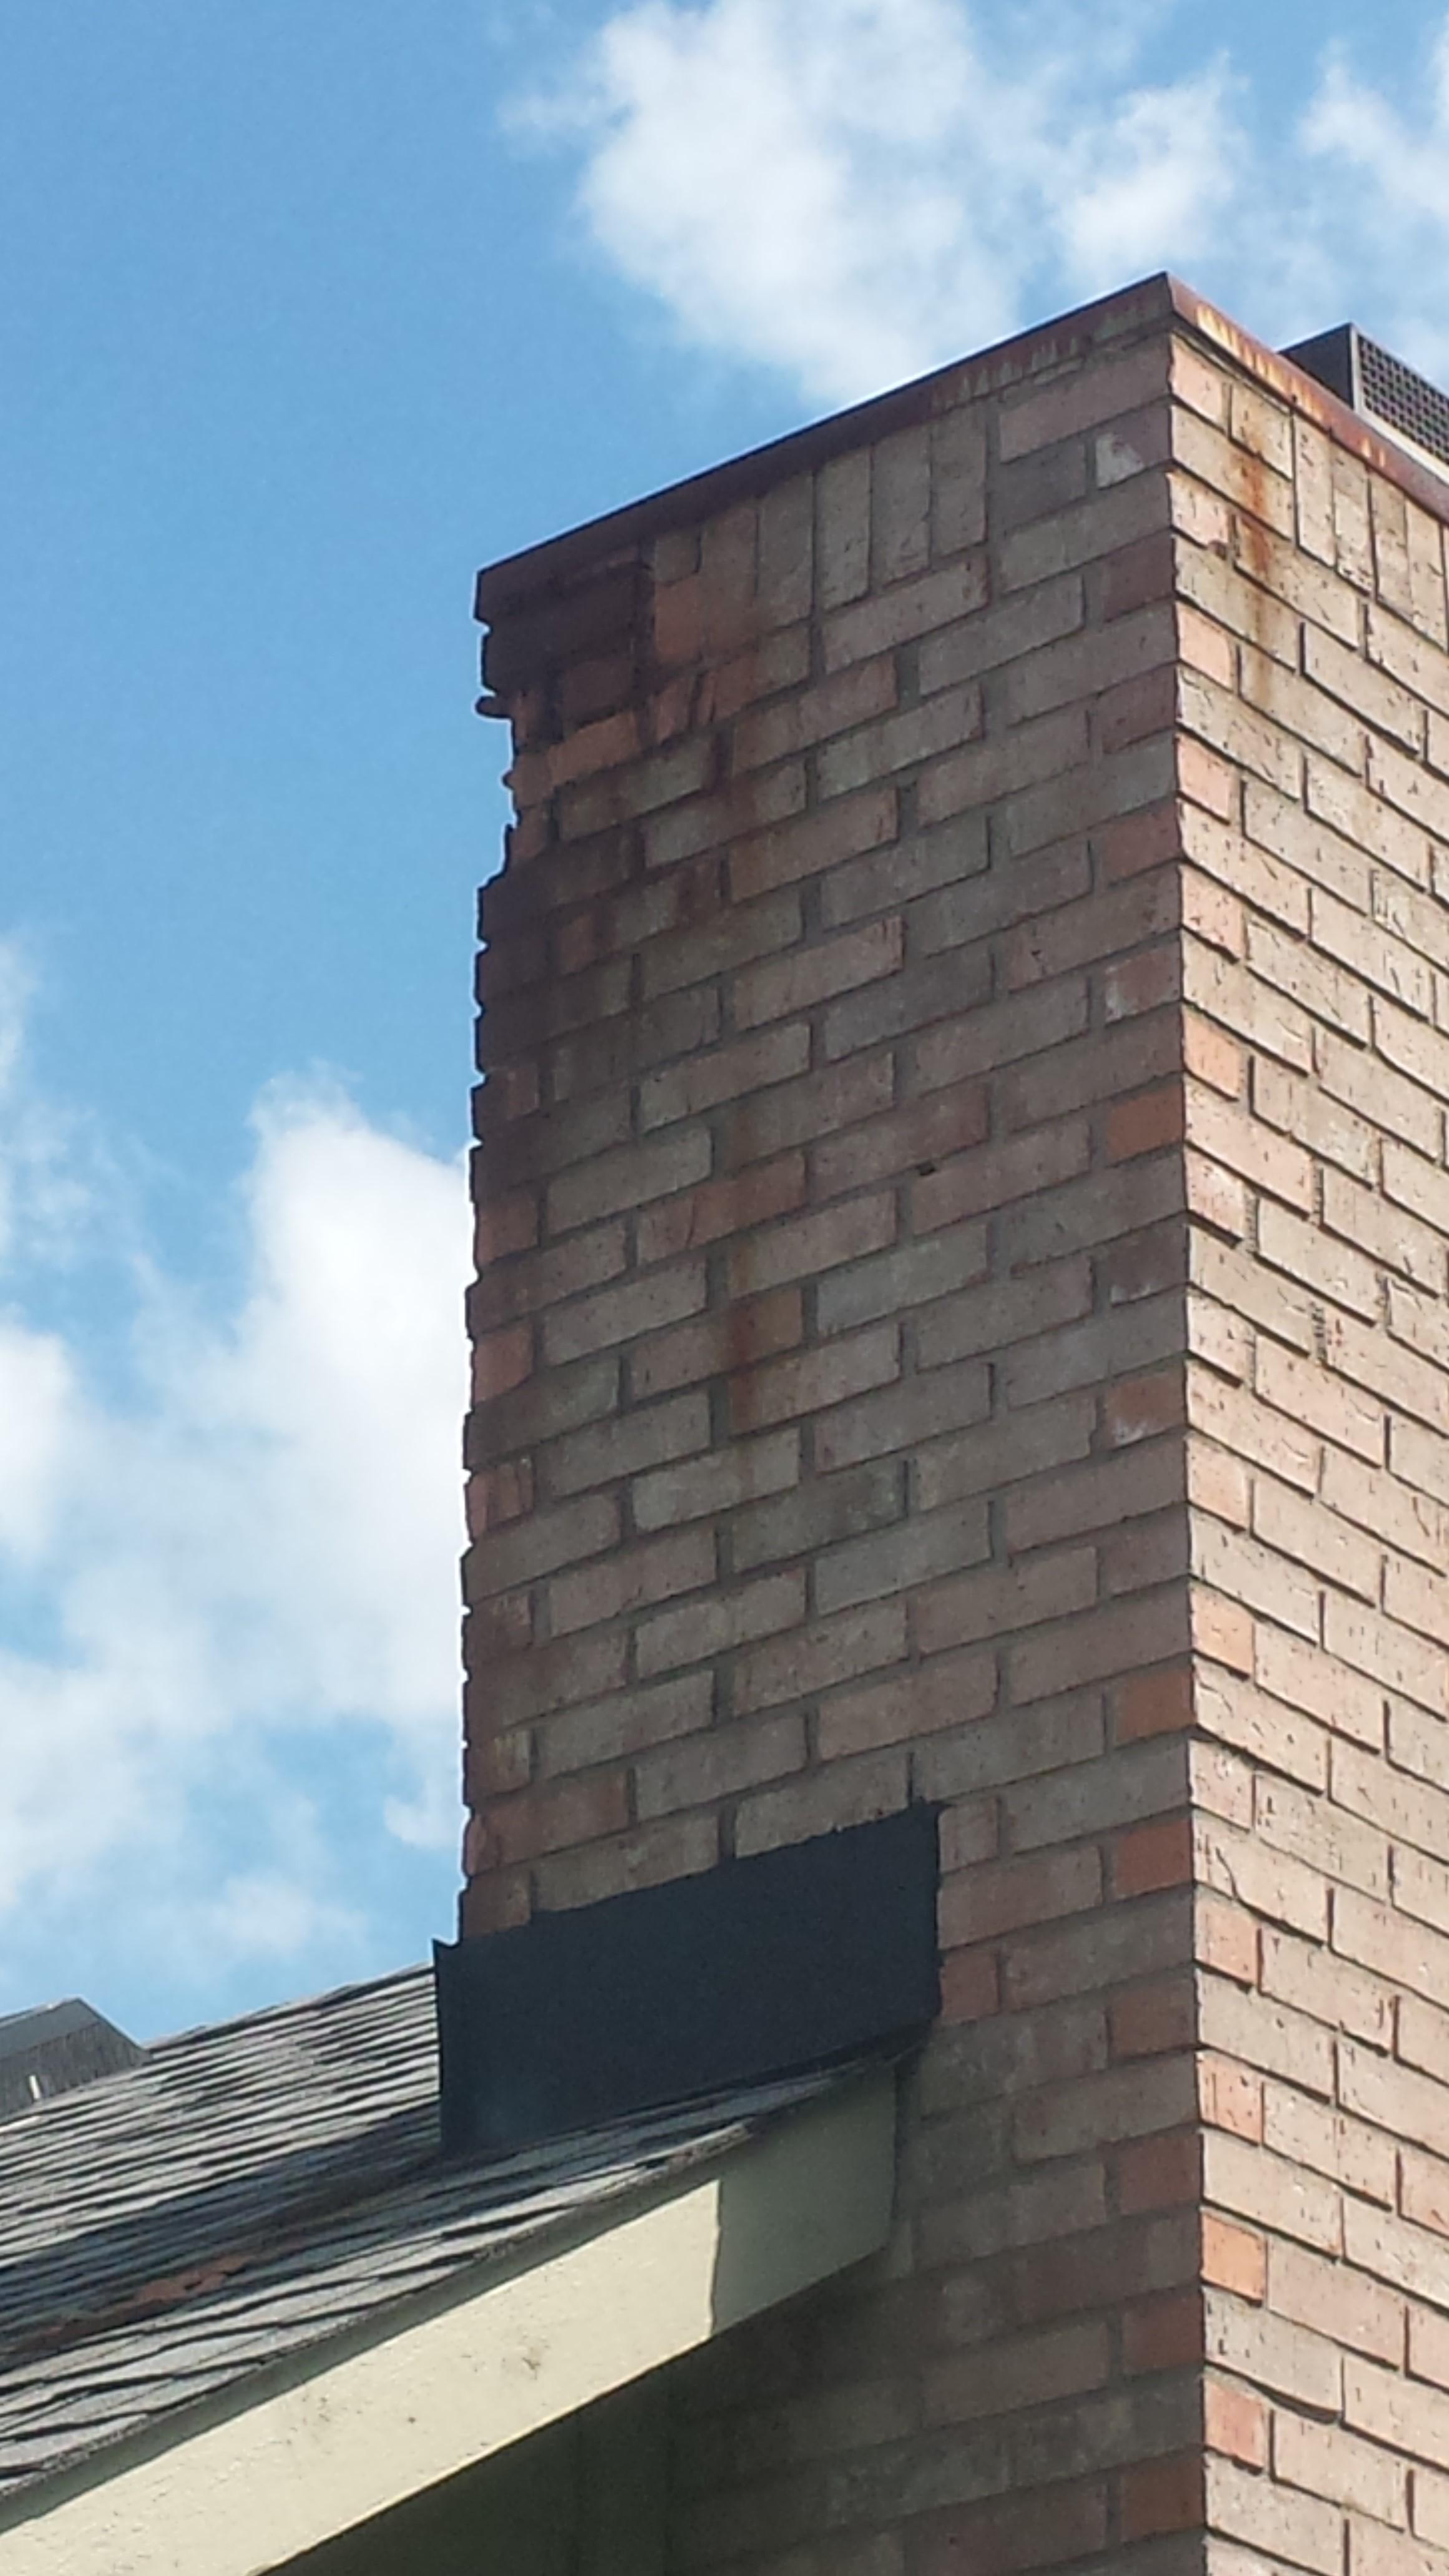 This chimney had a metal cap that began to rust . Also when the cap is flush with the sides of the chimney water ran down and deteriorated the brick